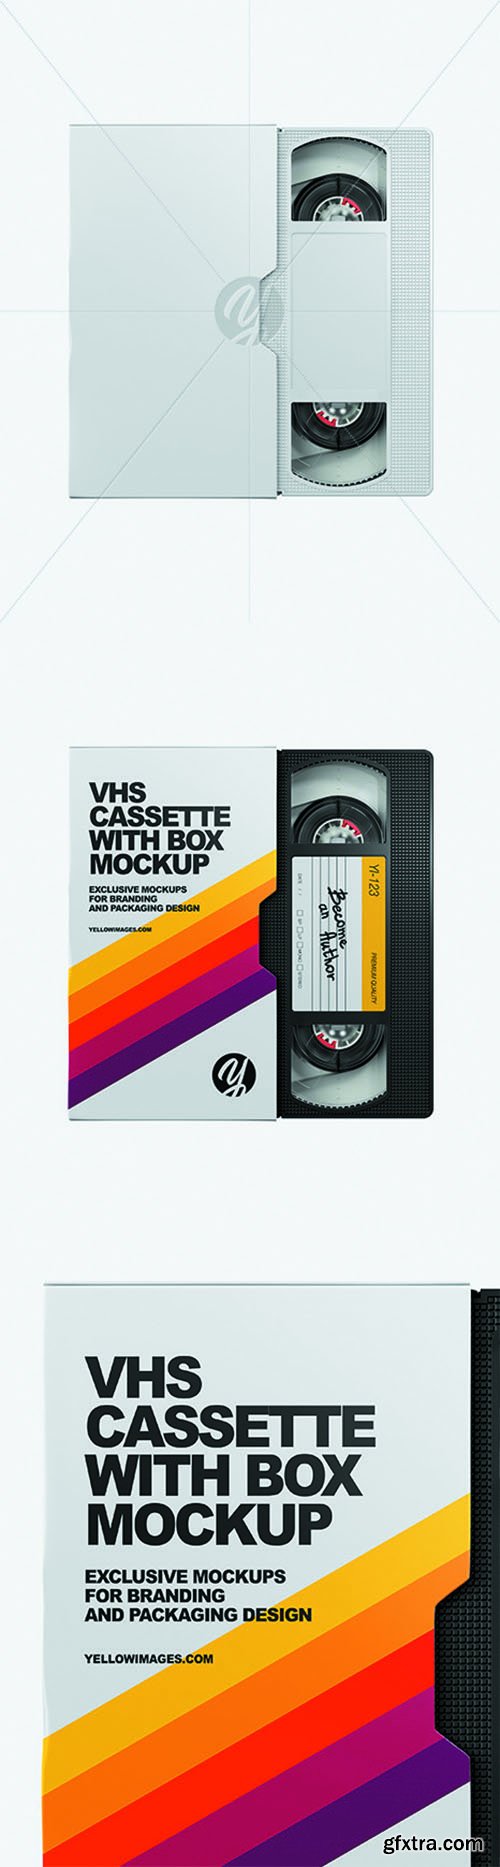 Download VHS Cassette with Box Mockup 61285 » GFxtra